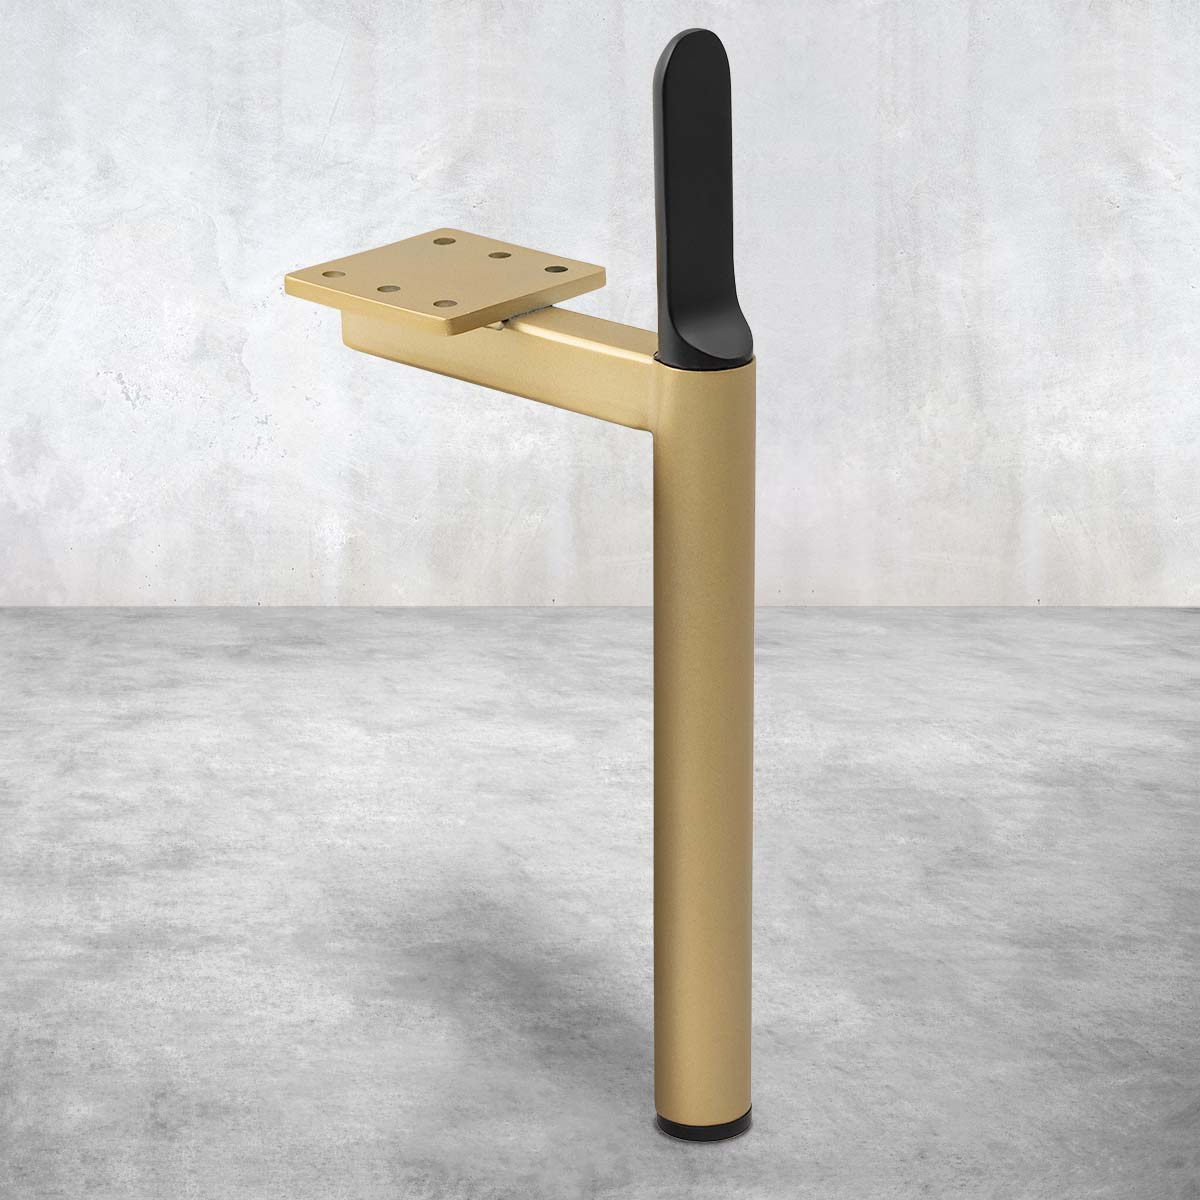 8" Matte Black and Brushed Brass Round Post Legs (Set of 4)